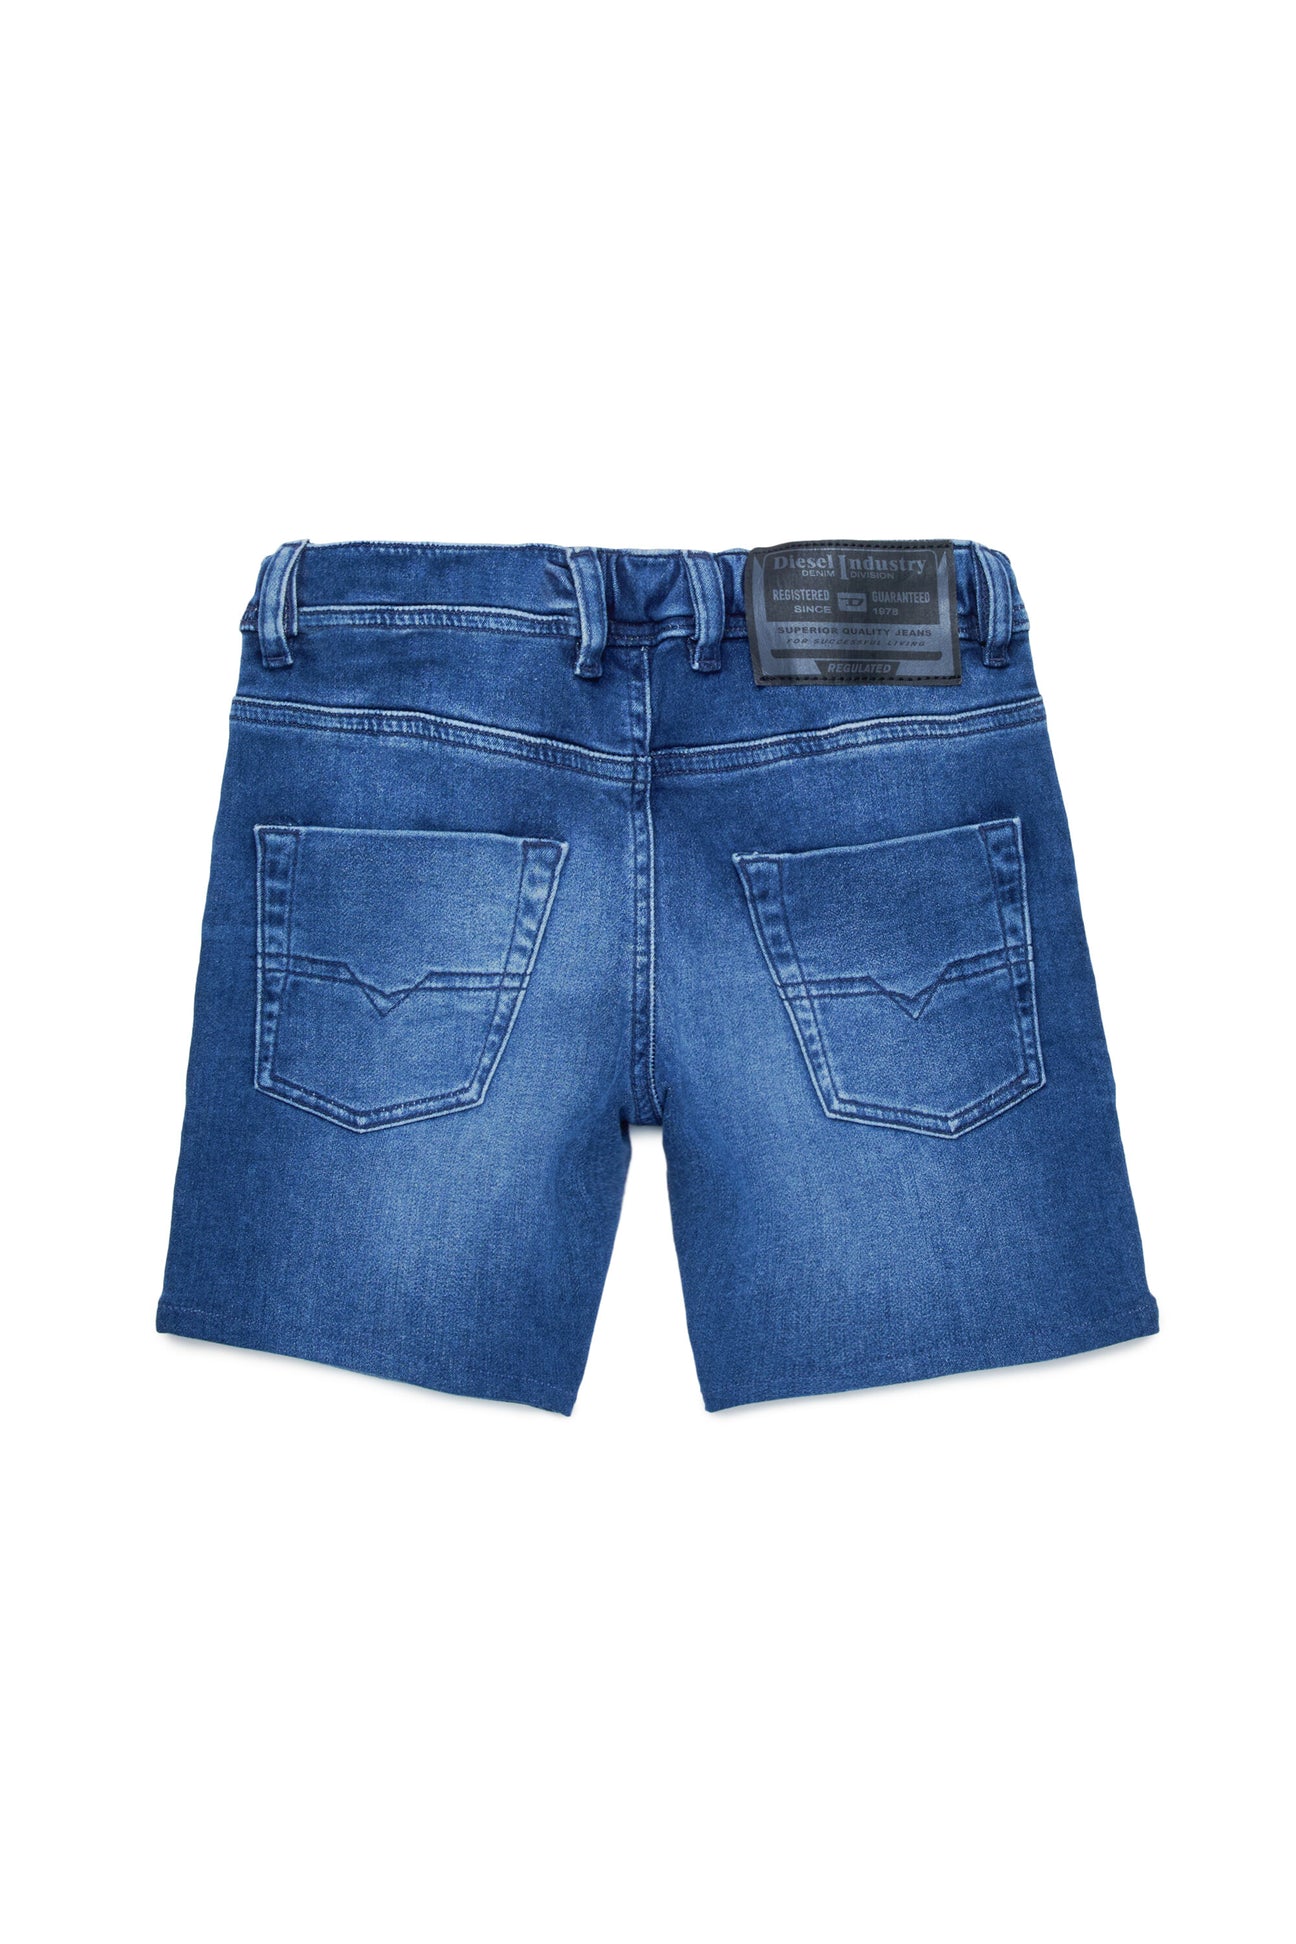 JoggJeans® shorts in mid-blue with shades JoggJeans® shorts in mid-blue with shades